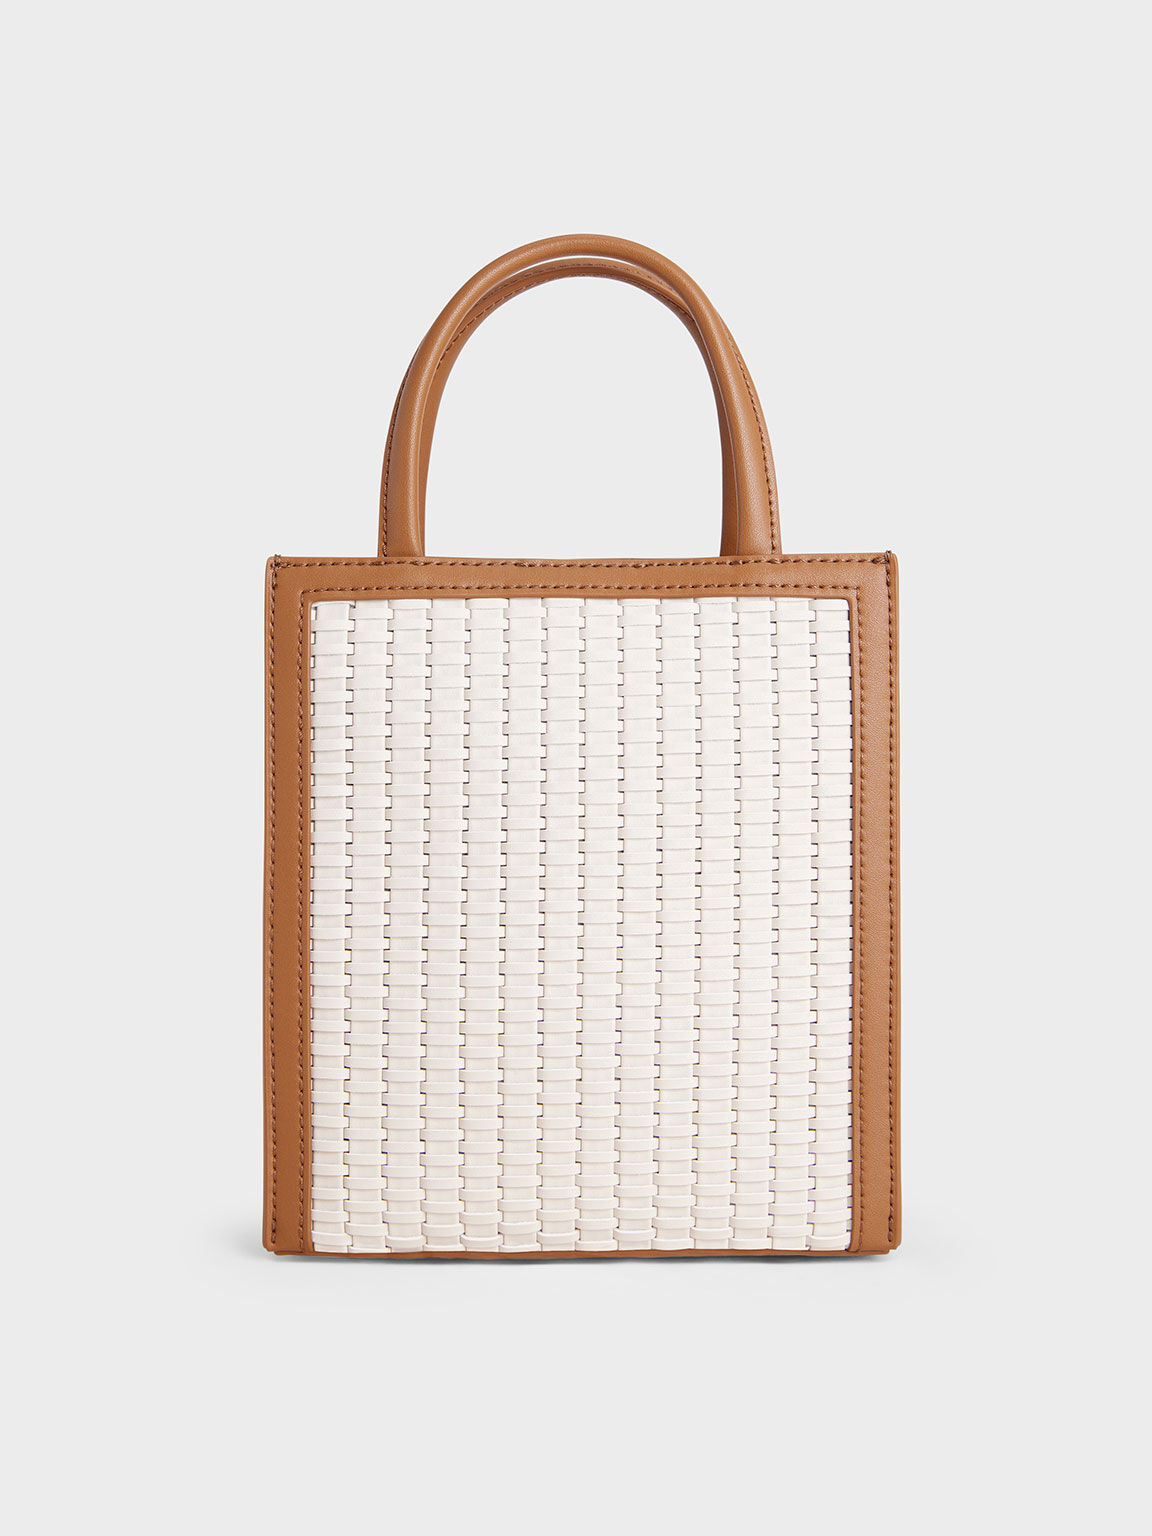 Woven Double Handle Tote Bag, Chocolate, hi-res